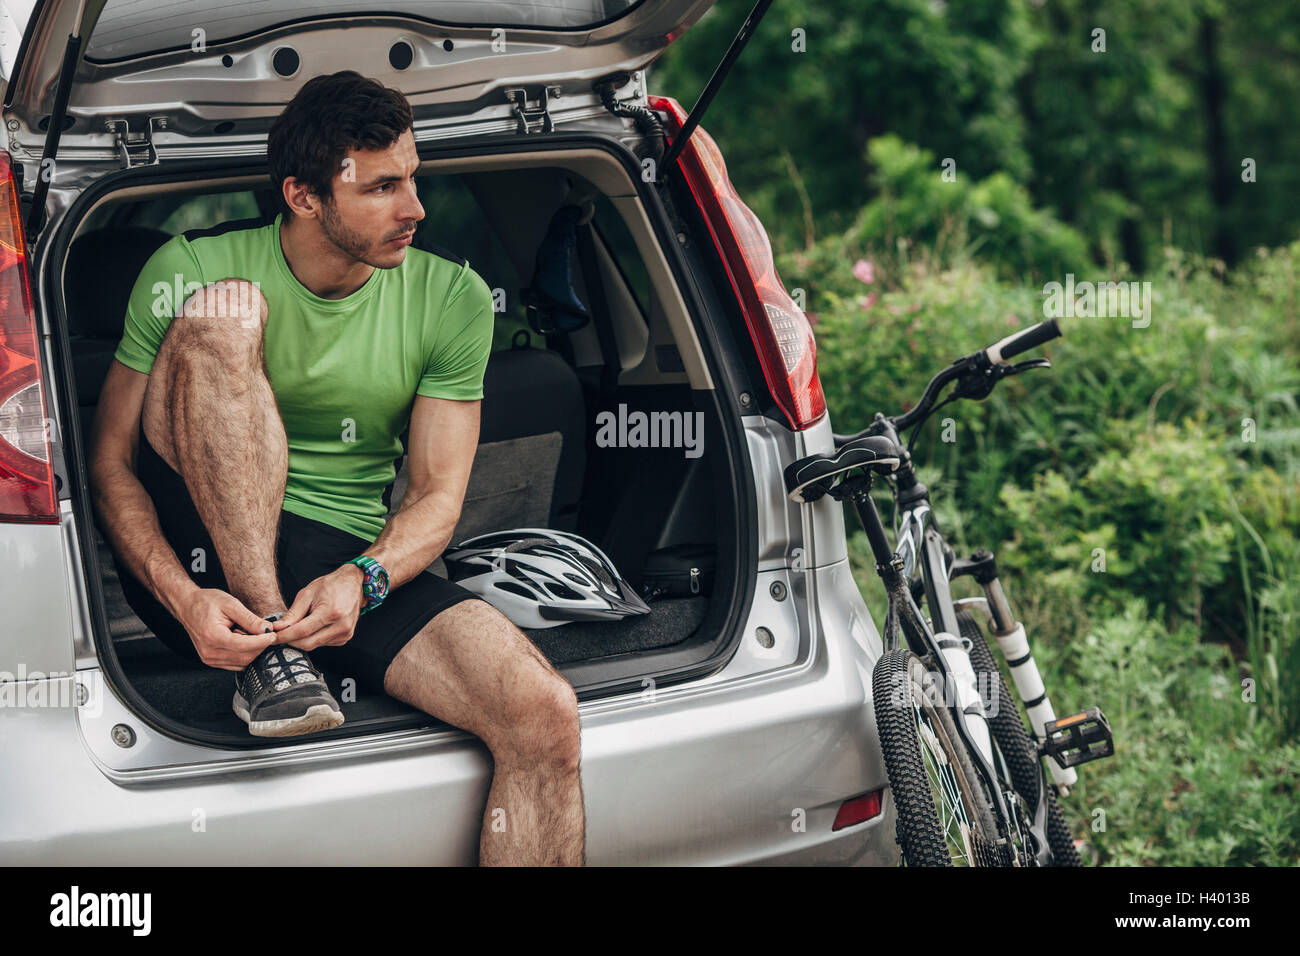 Man tying shoelace while sitting in car trunk Stock Photo